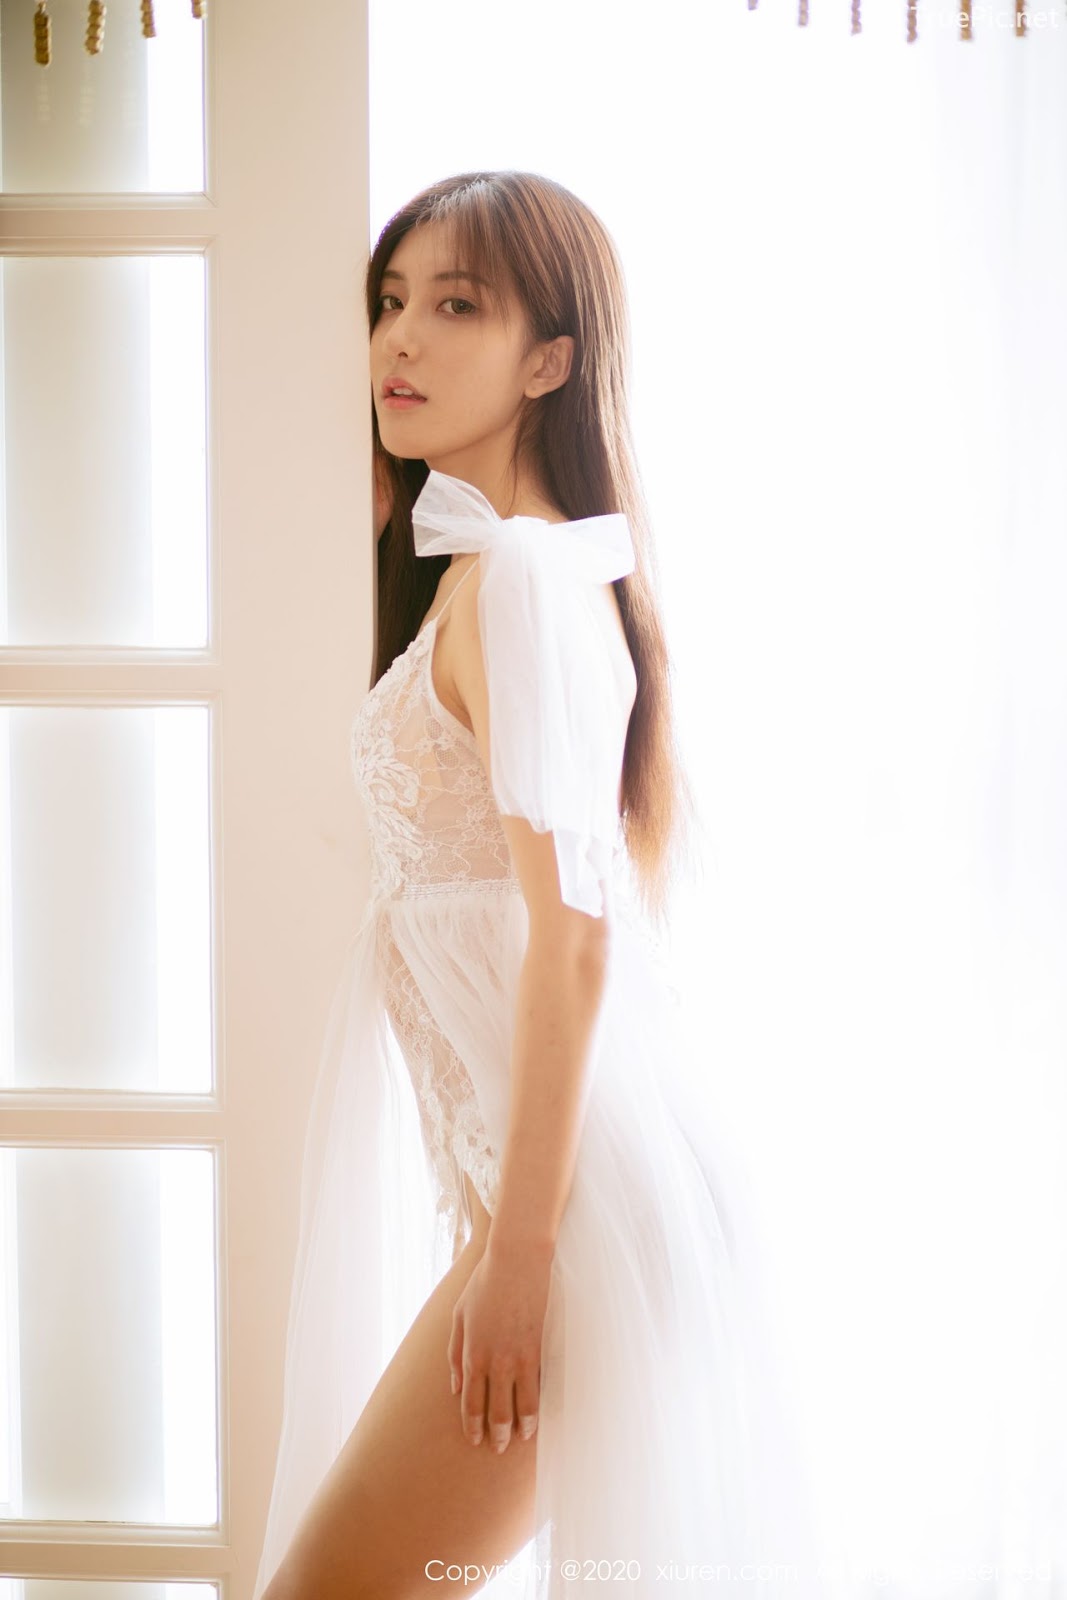 XIUREN No.1914 - Chinese model 林文文Yooki so Sexy with Transparent White Lace Dress - Picture 51